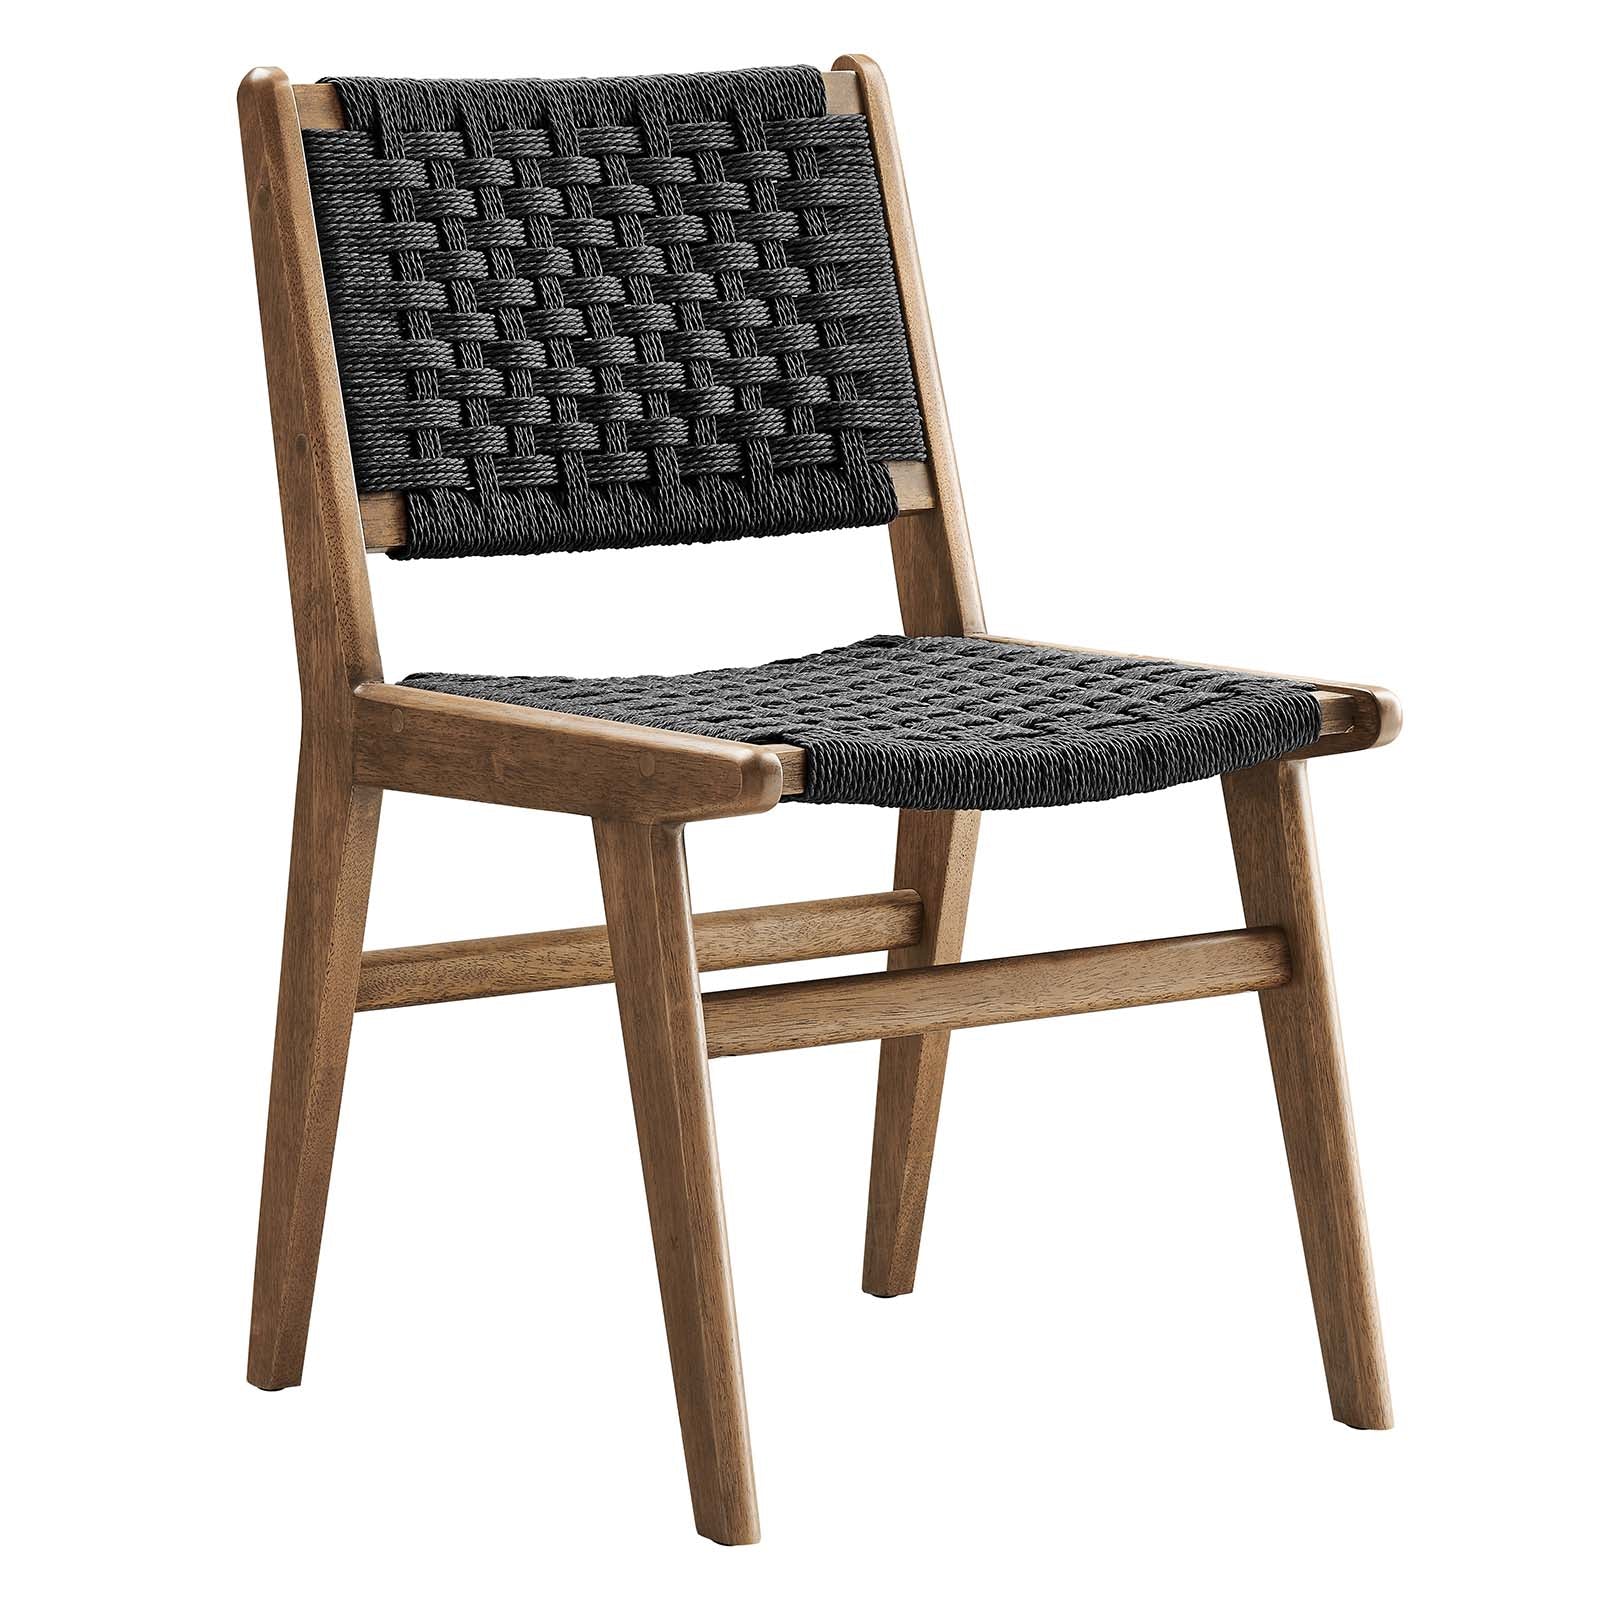 Saorise Woven Rope Wood Dining Side Chair - Set of 2